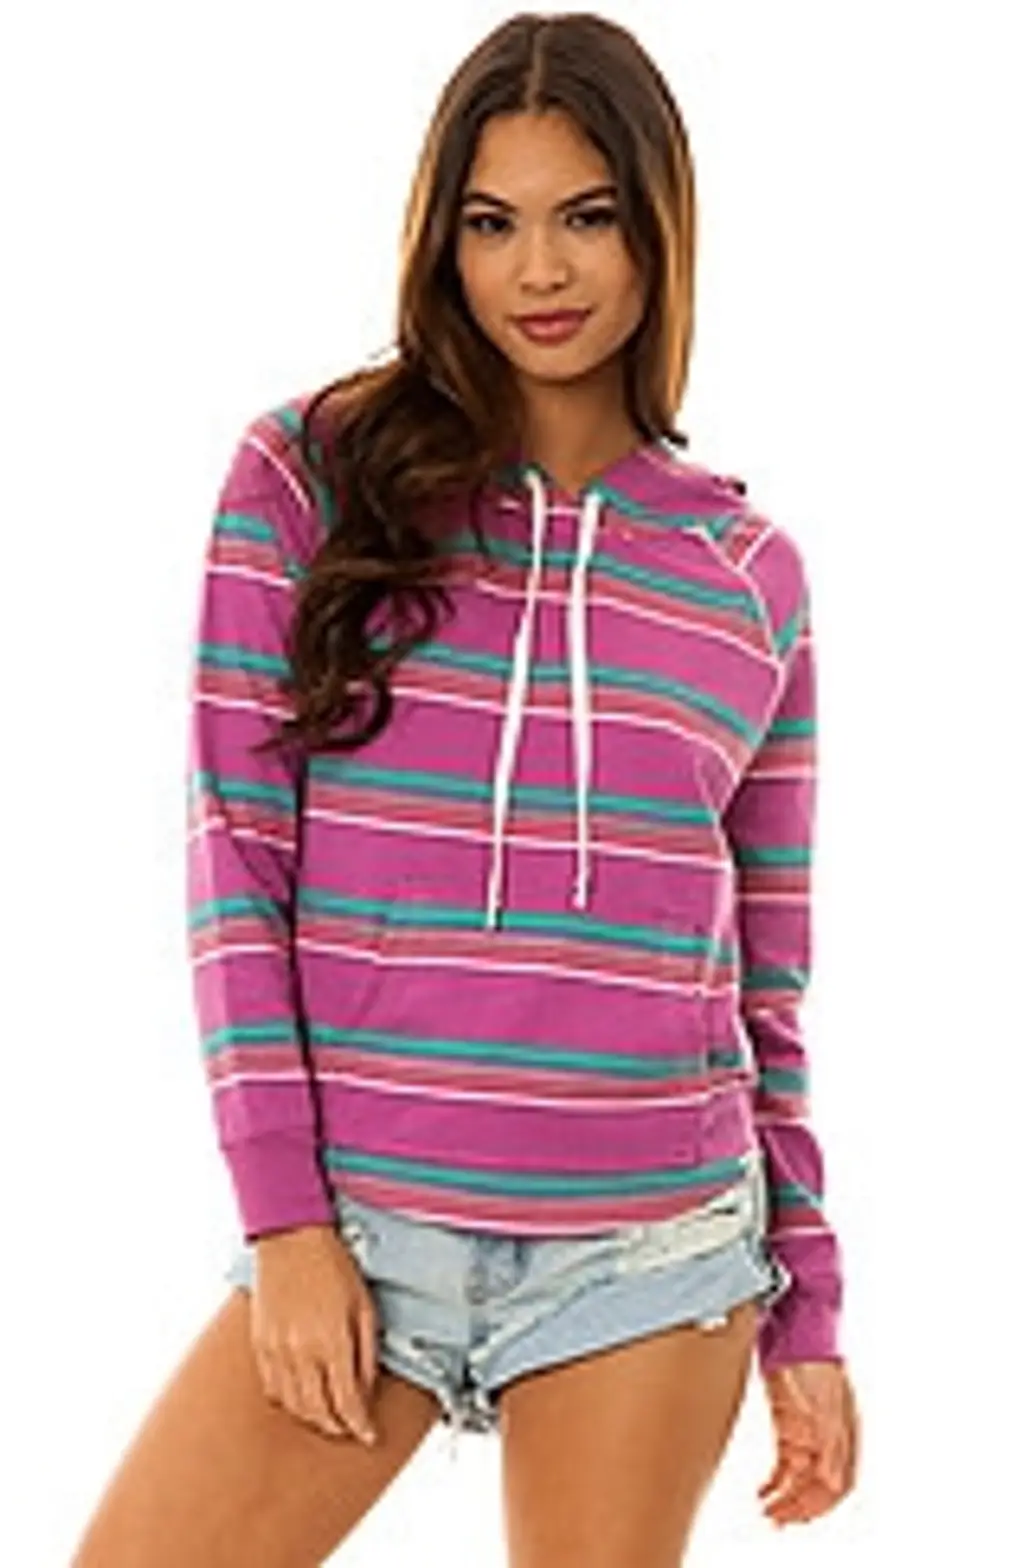 Vans the Access Stripe Pullover Hoody in Dahlia Mauve